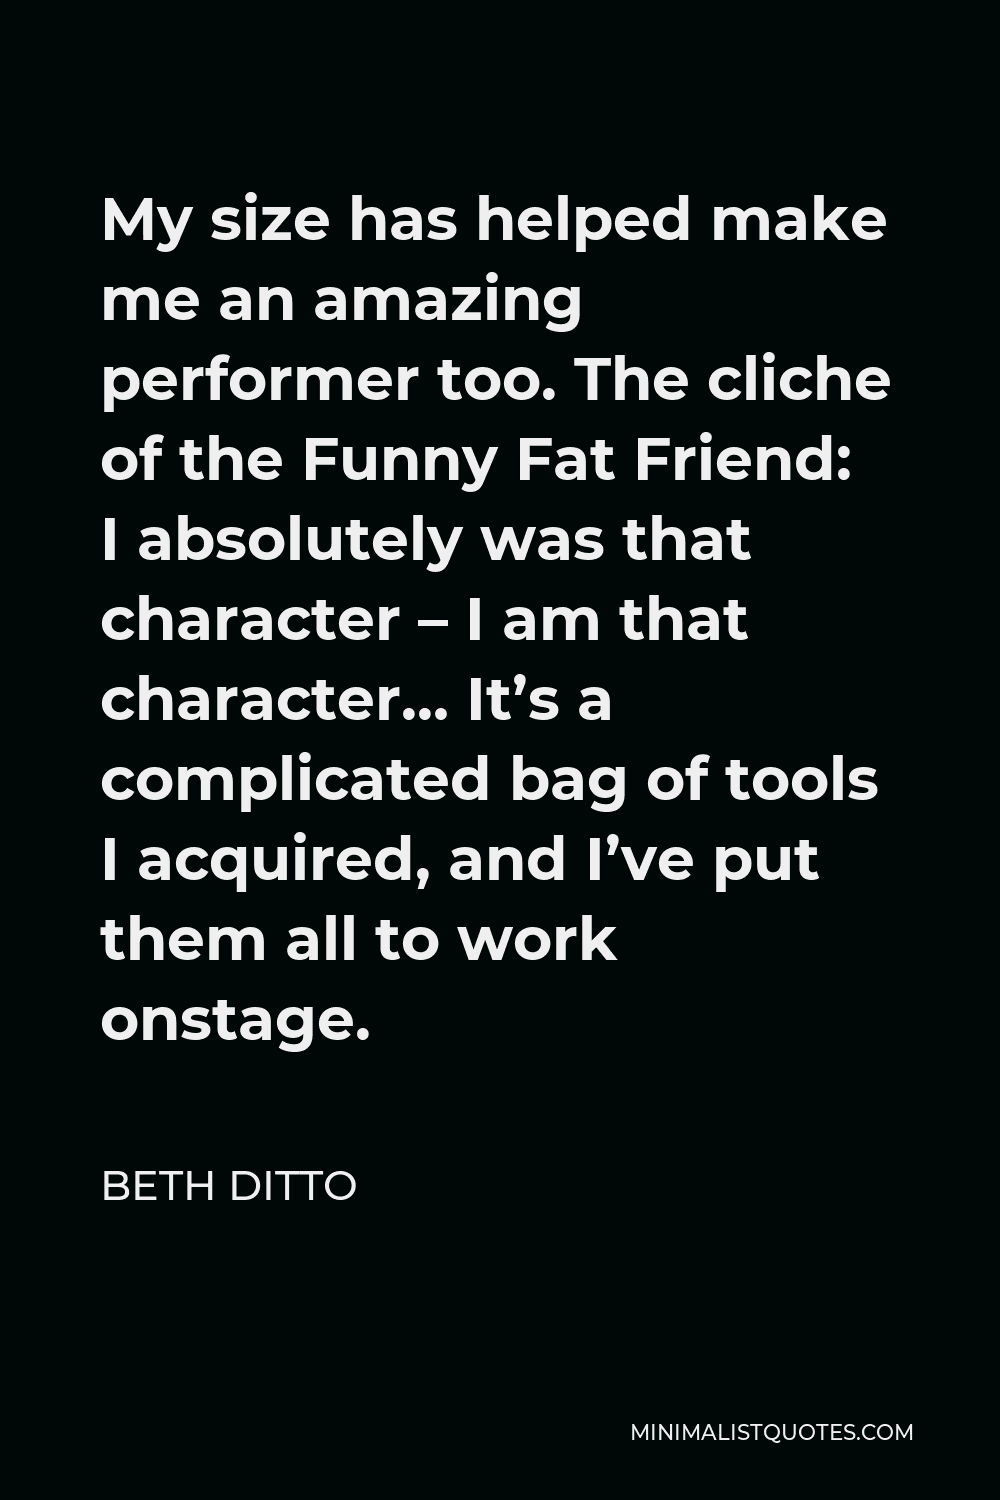 Beth Ditto Quote - My size has helped make me an amazing performer too. The cliche of the Funny Fat Friend: I absolutely was that character – I am that character… It’s a complicated bag of tools I acquired, and I’ve put them all to work onstage.